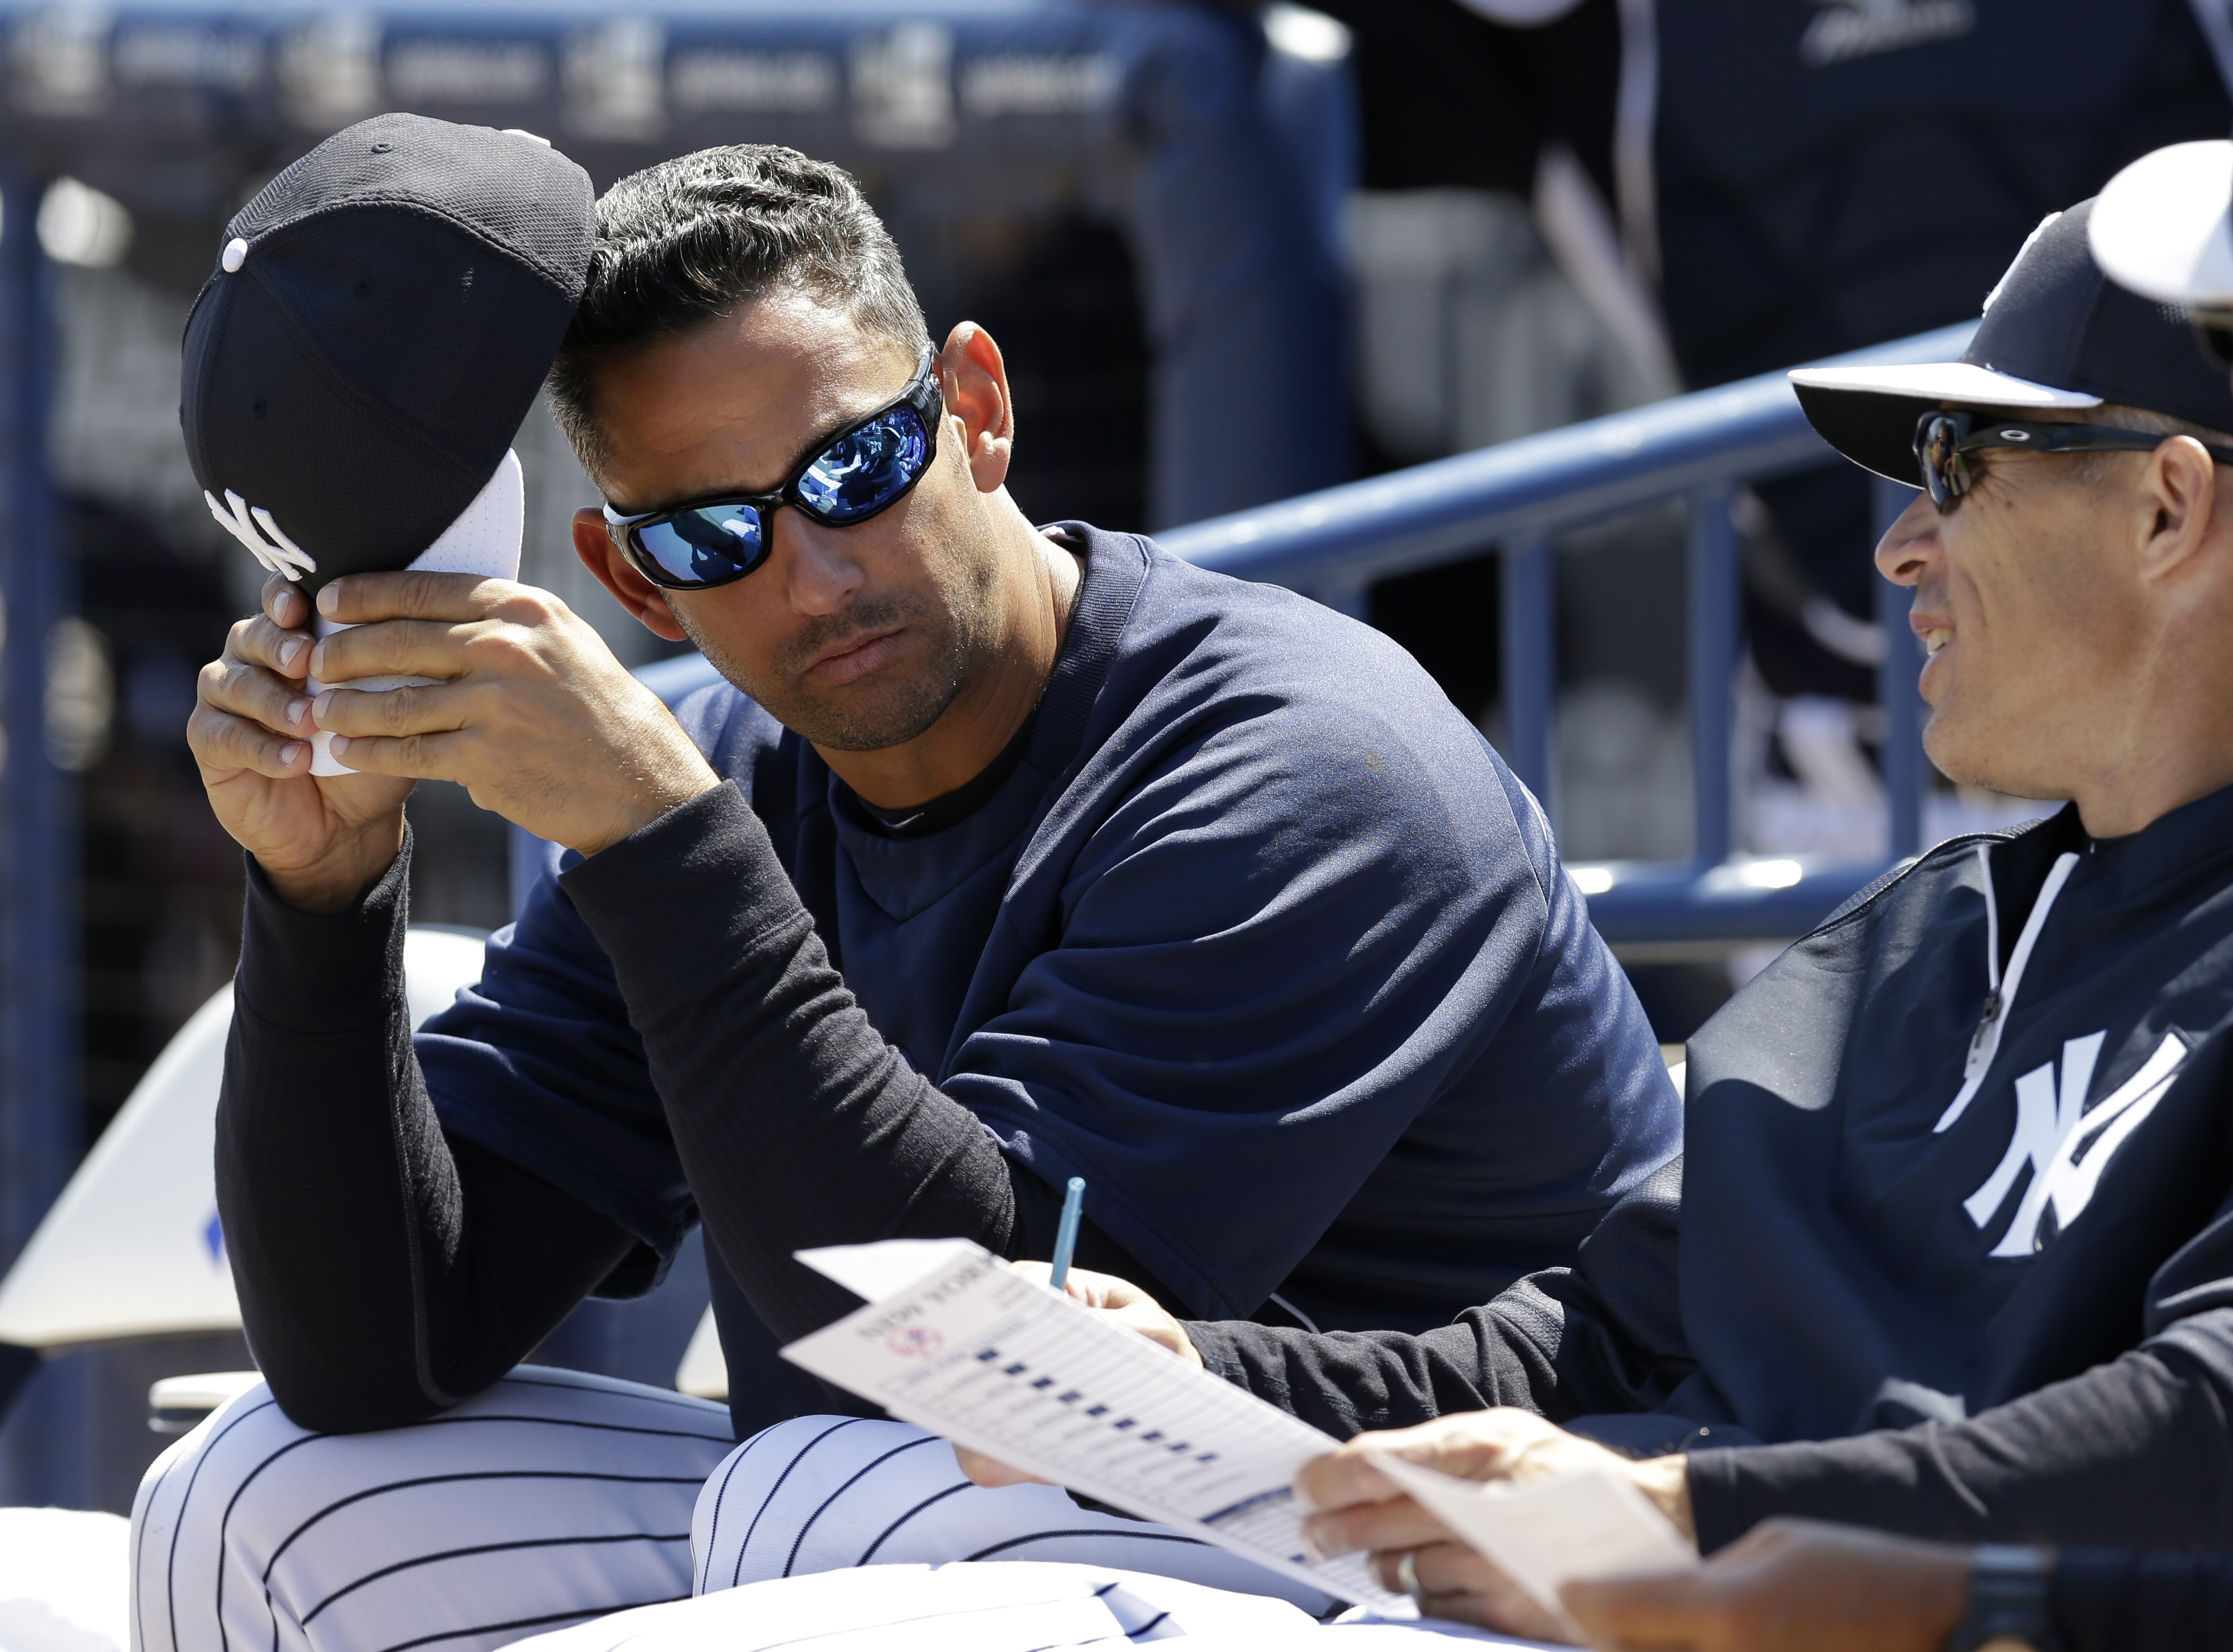 Former New York Yankees catcher Jorge Posada, left, in camp as a guest instructor, sits with New York Yankees manager Joe Girardi before a spring training baseball game against the Miami Marlins in Tampa, on March 15, 2013. (Kathy Willens—AP)